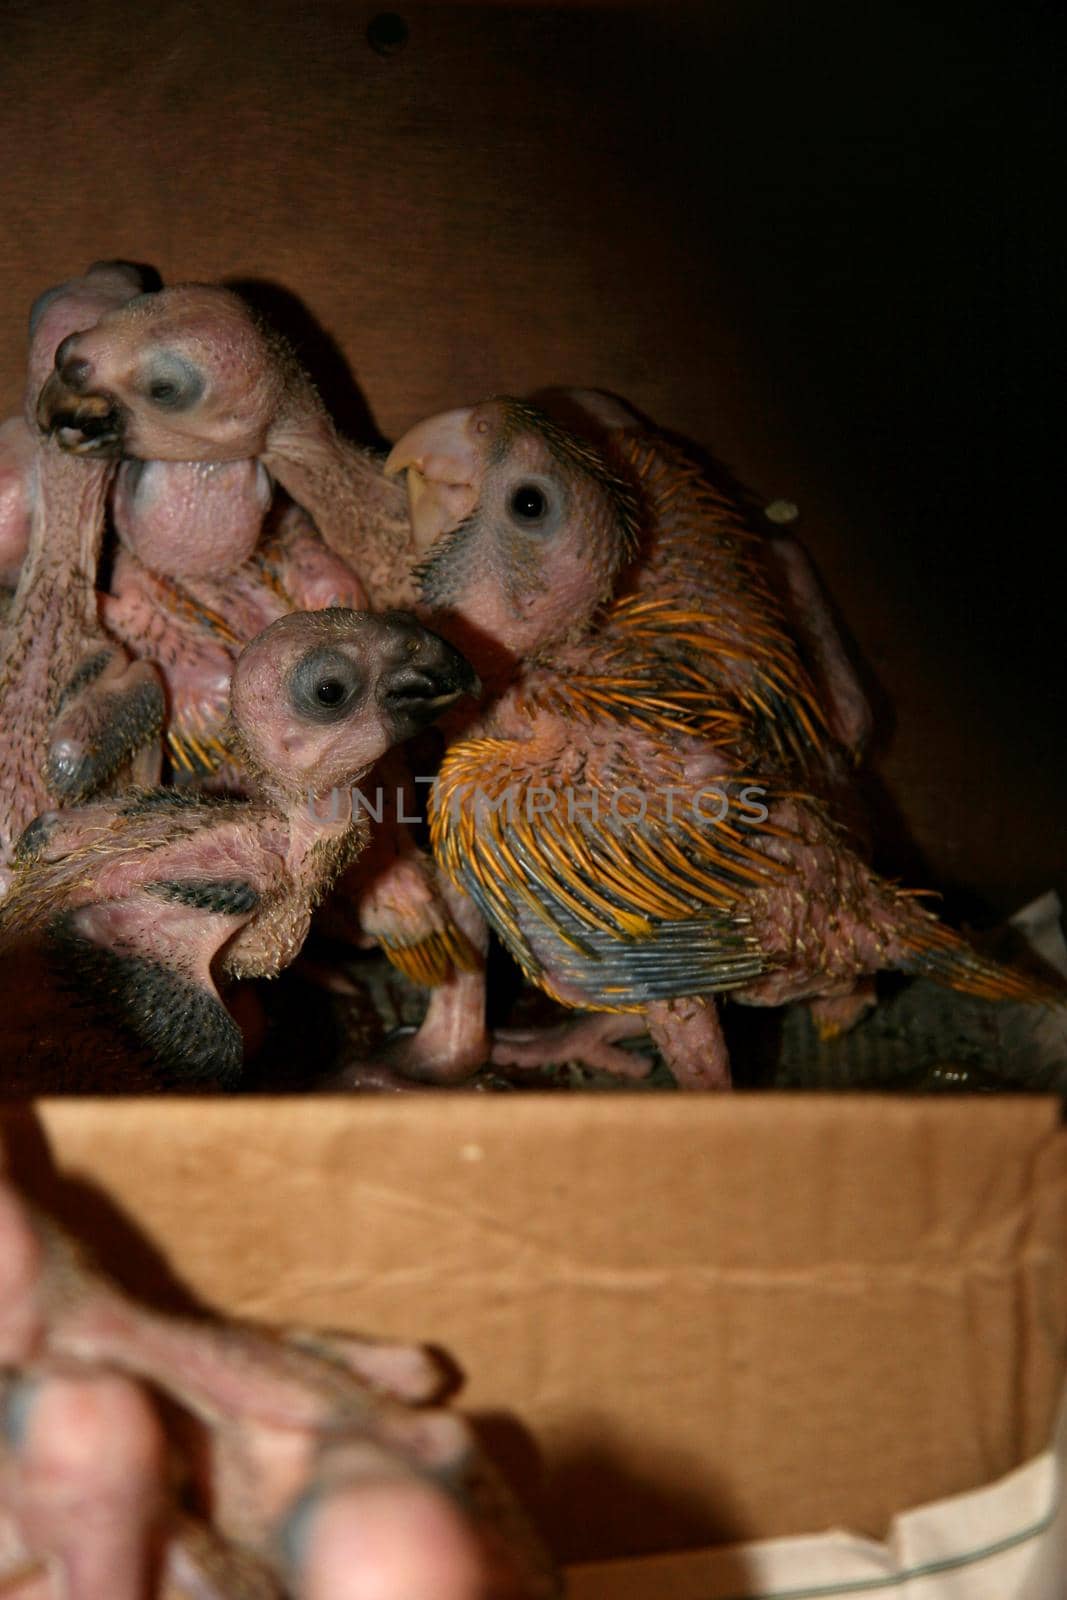 eunapolis, bahia / brazil - february 26, 2008: baby parrot seized from the hands of an animal dealer by the Federal Highway Police on Highway BR 101 in the city of Eunapolis


